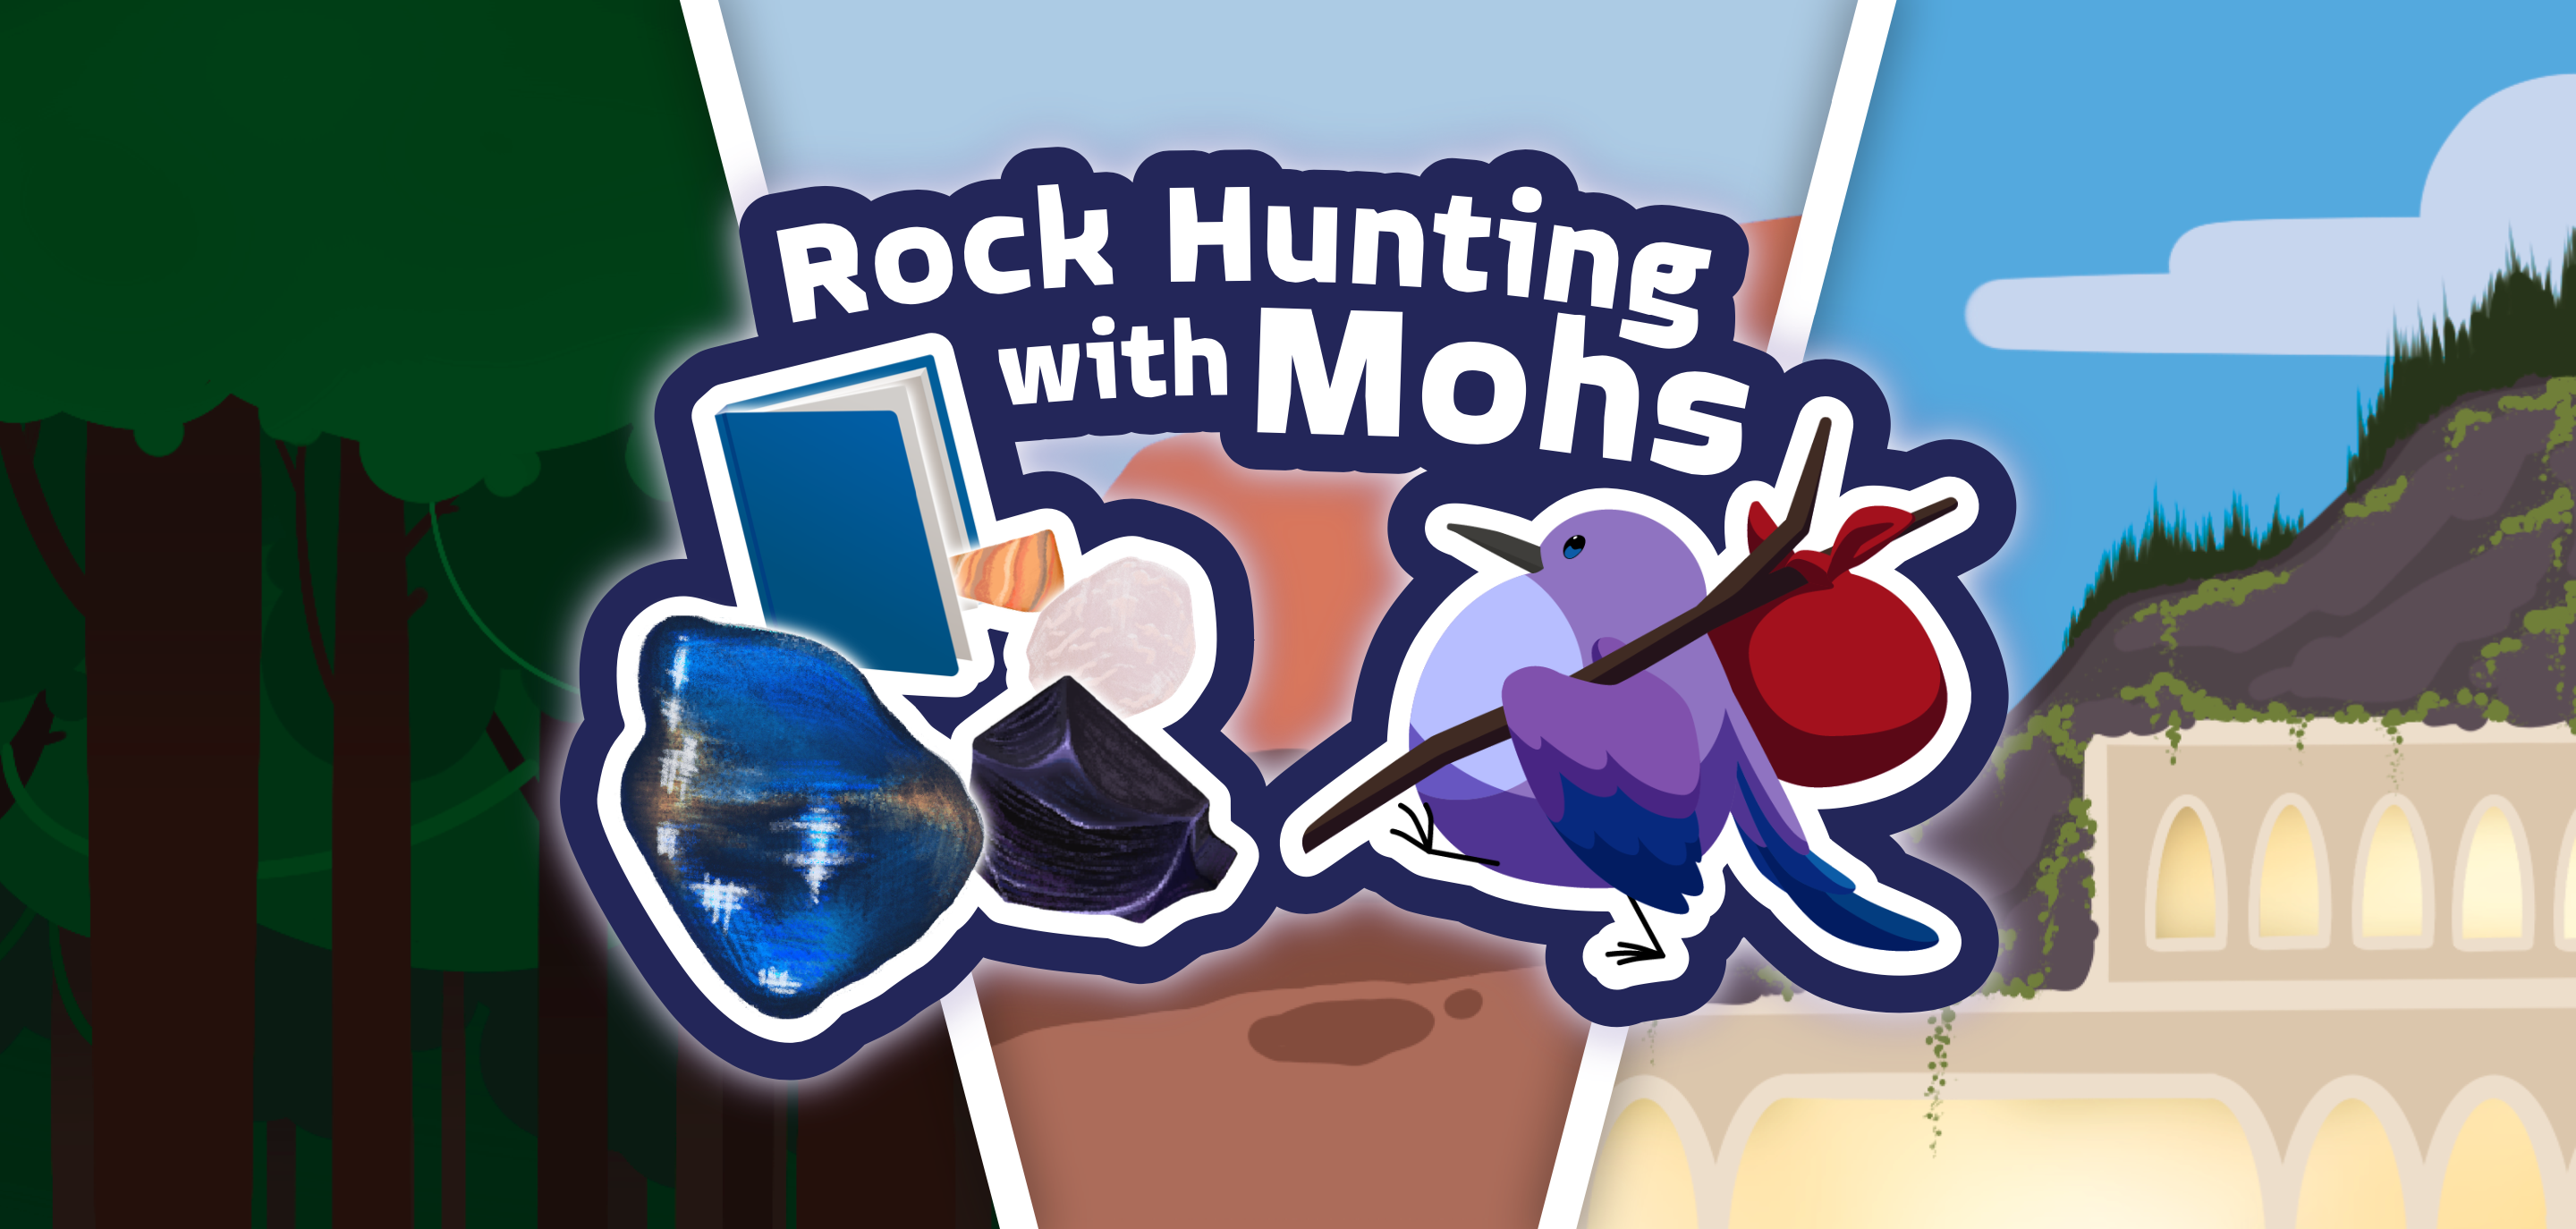 Rock Hunting with Mohs